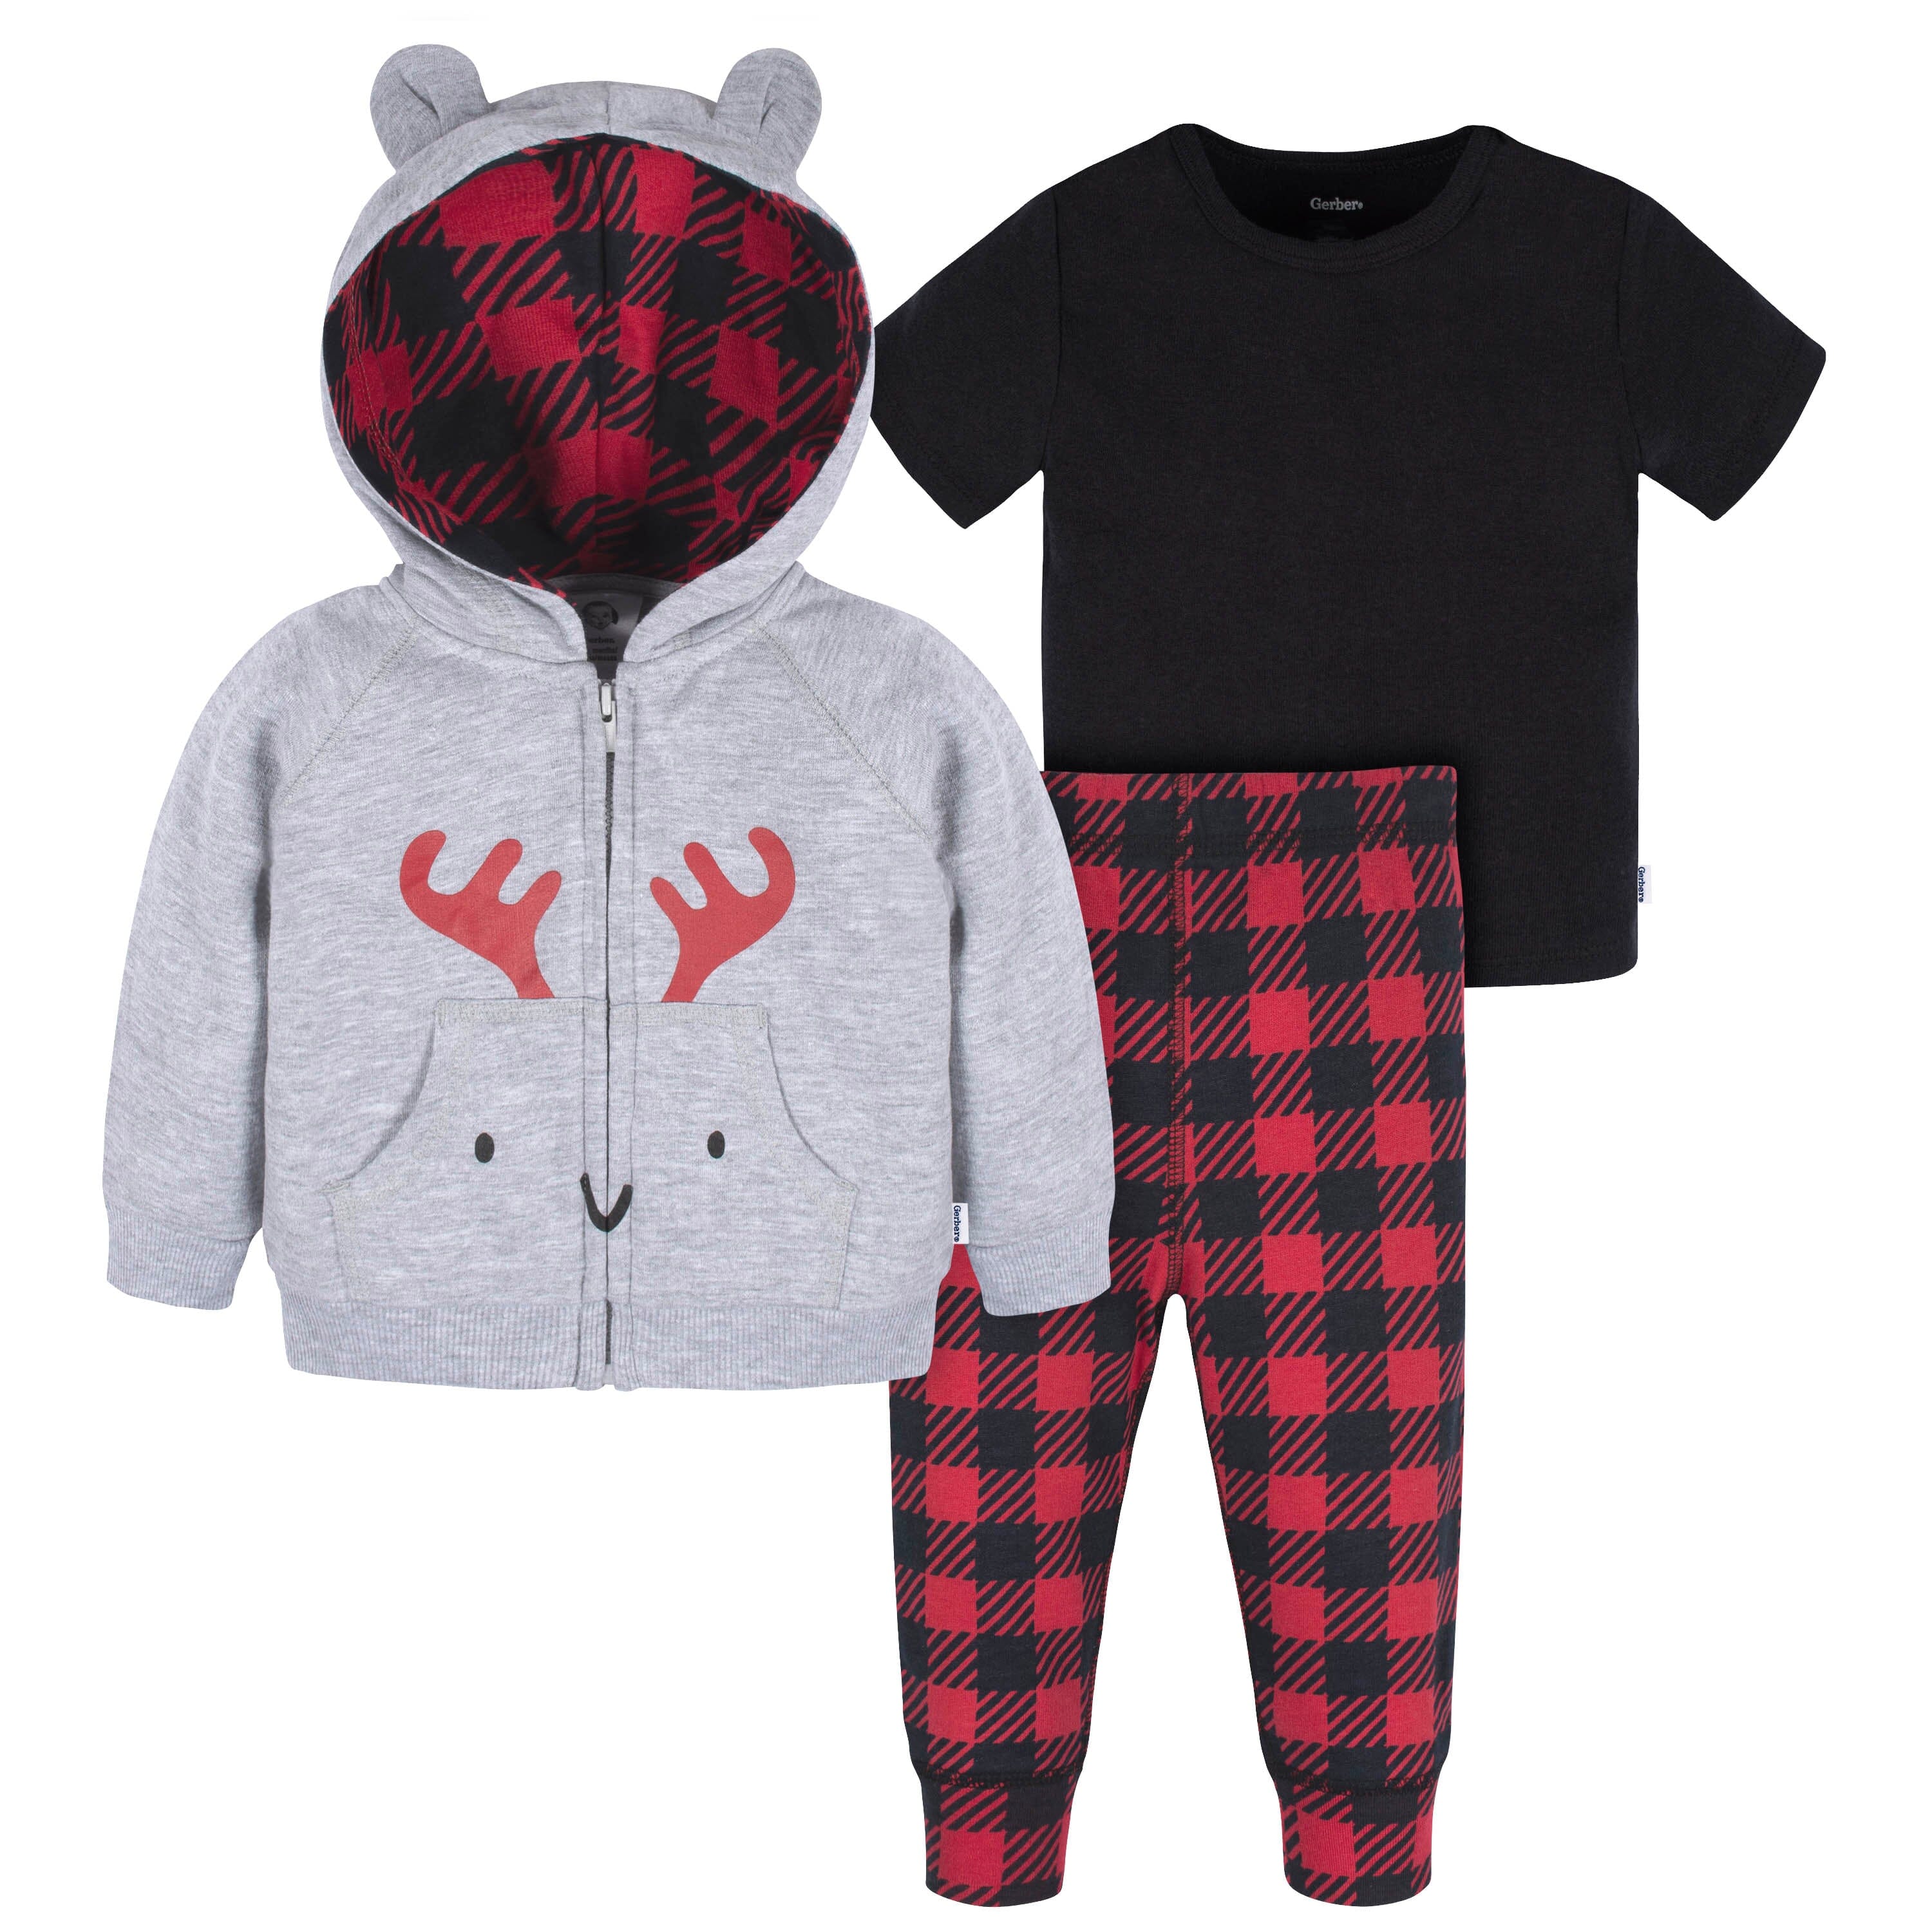 2-piece Toddler Girl Plaid Hooded Long-sleeve Red Hoodie Top and White Tights Pants Set